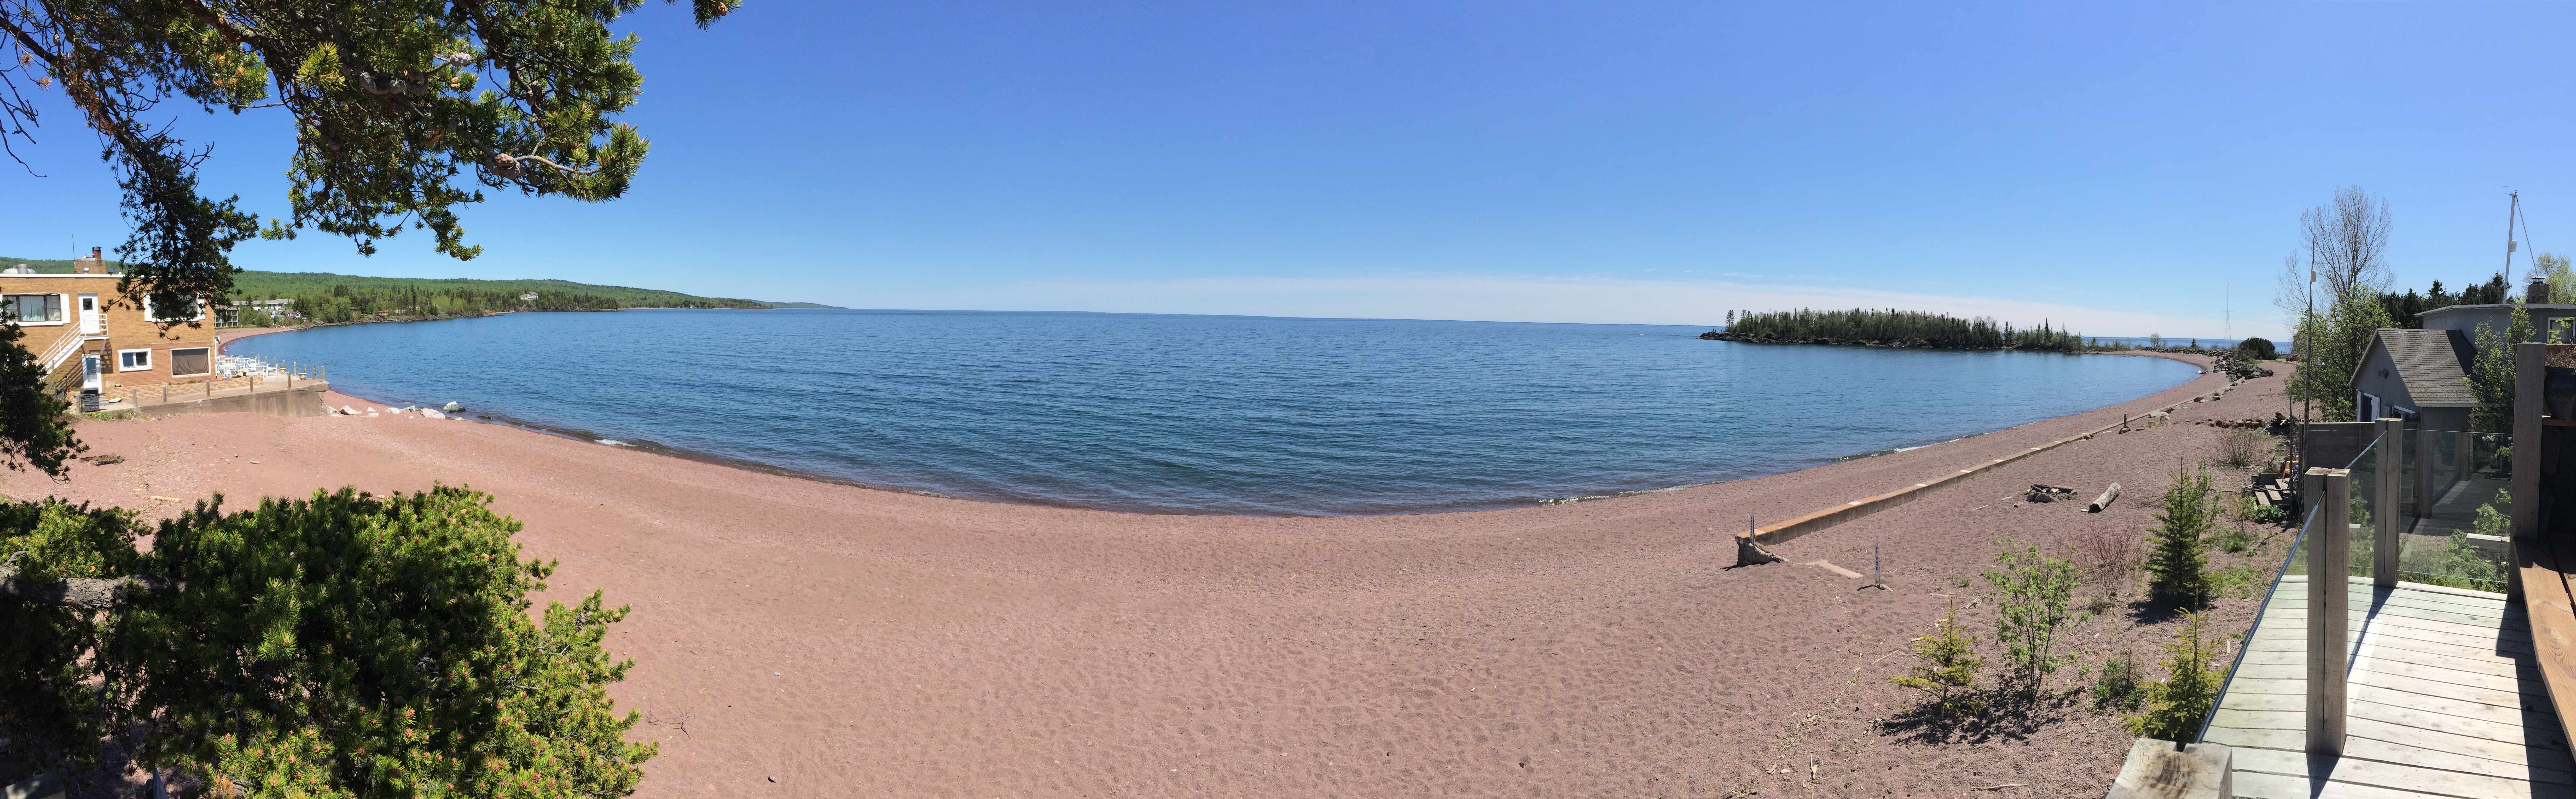 Pano of Lake Superior from Sydney's rooftop deck